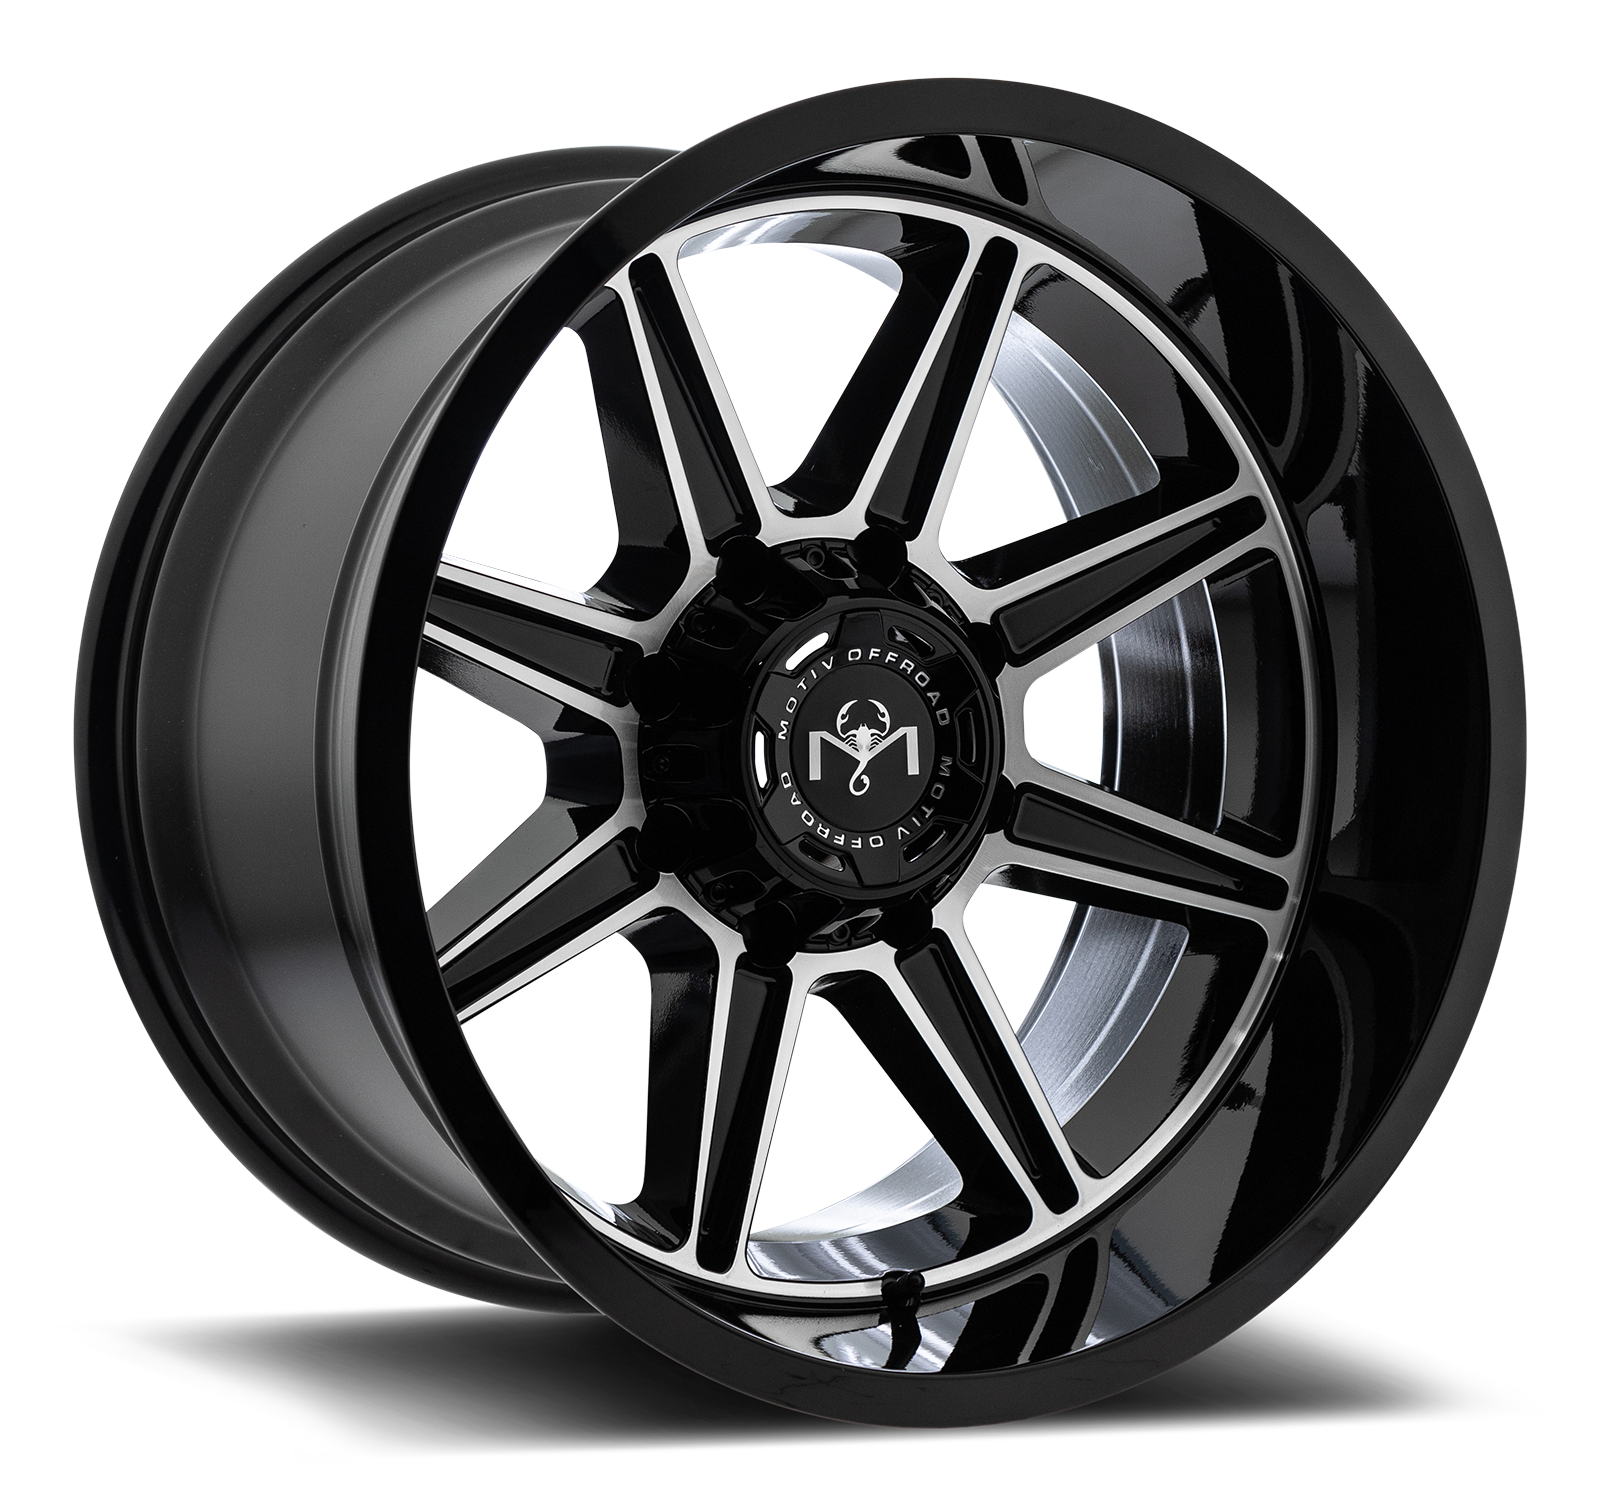 Motiv Off Road BALAST 17X9 +00 8X6.50 Gloss Black With Machined Face Accents